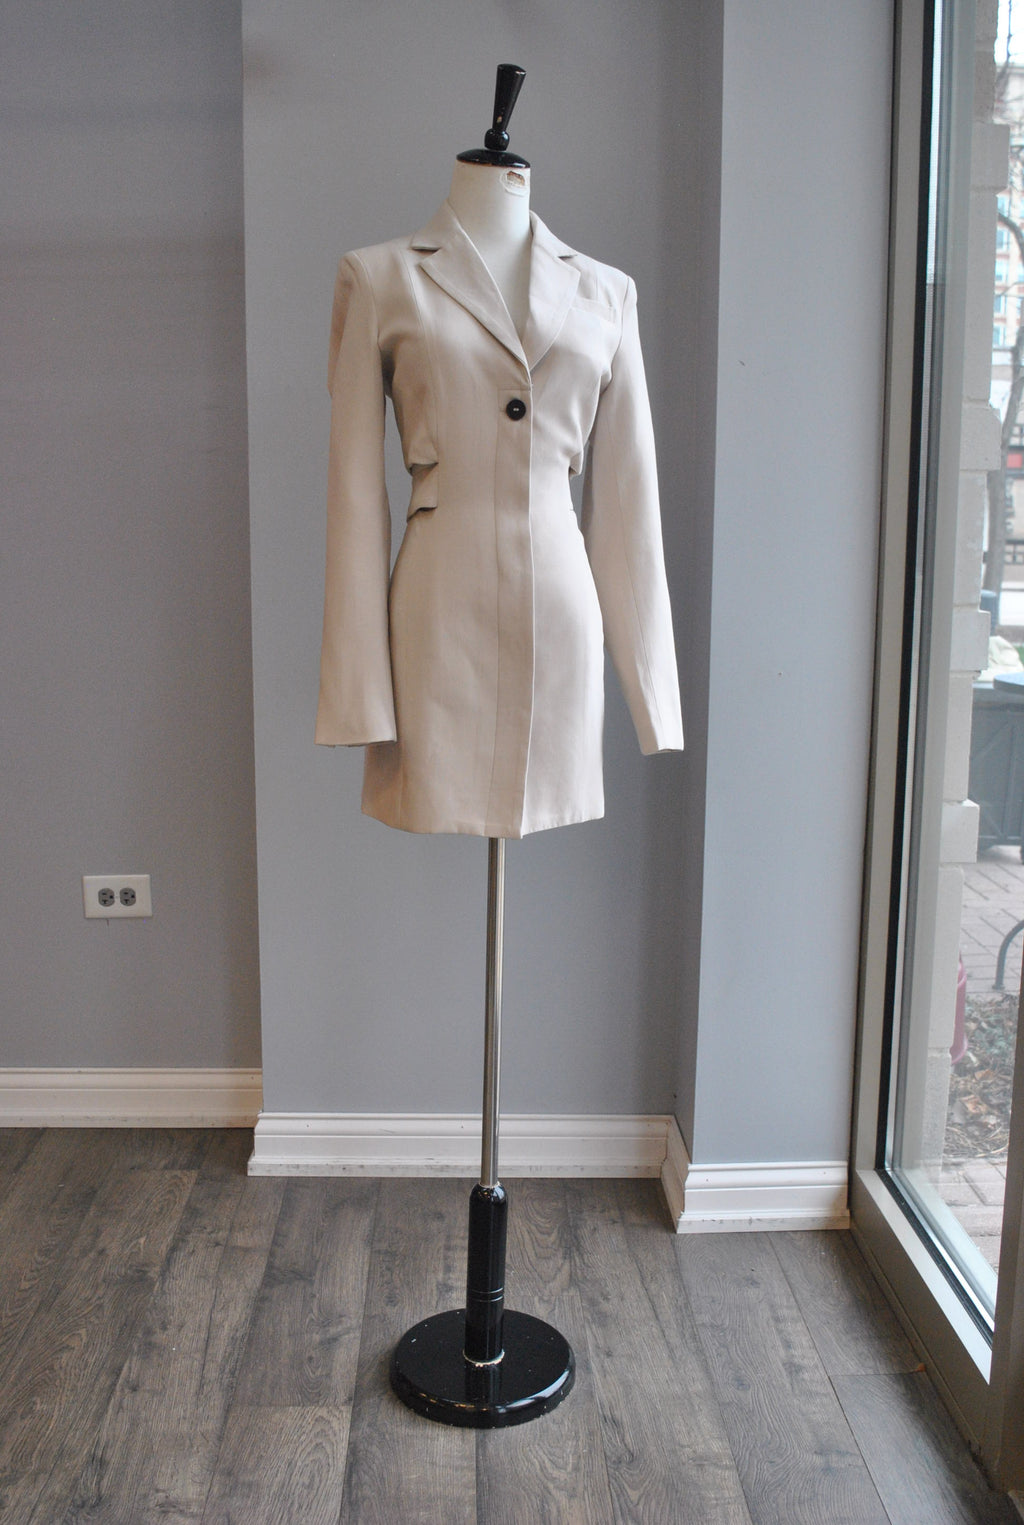 CLEARANCE - OATMEAL JACKET DRESS WITH OPEN BACK